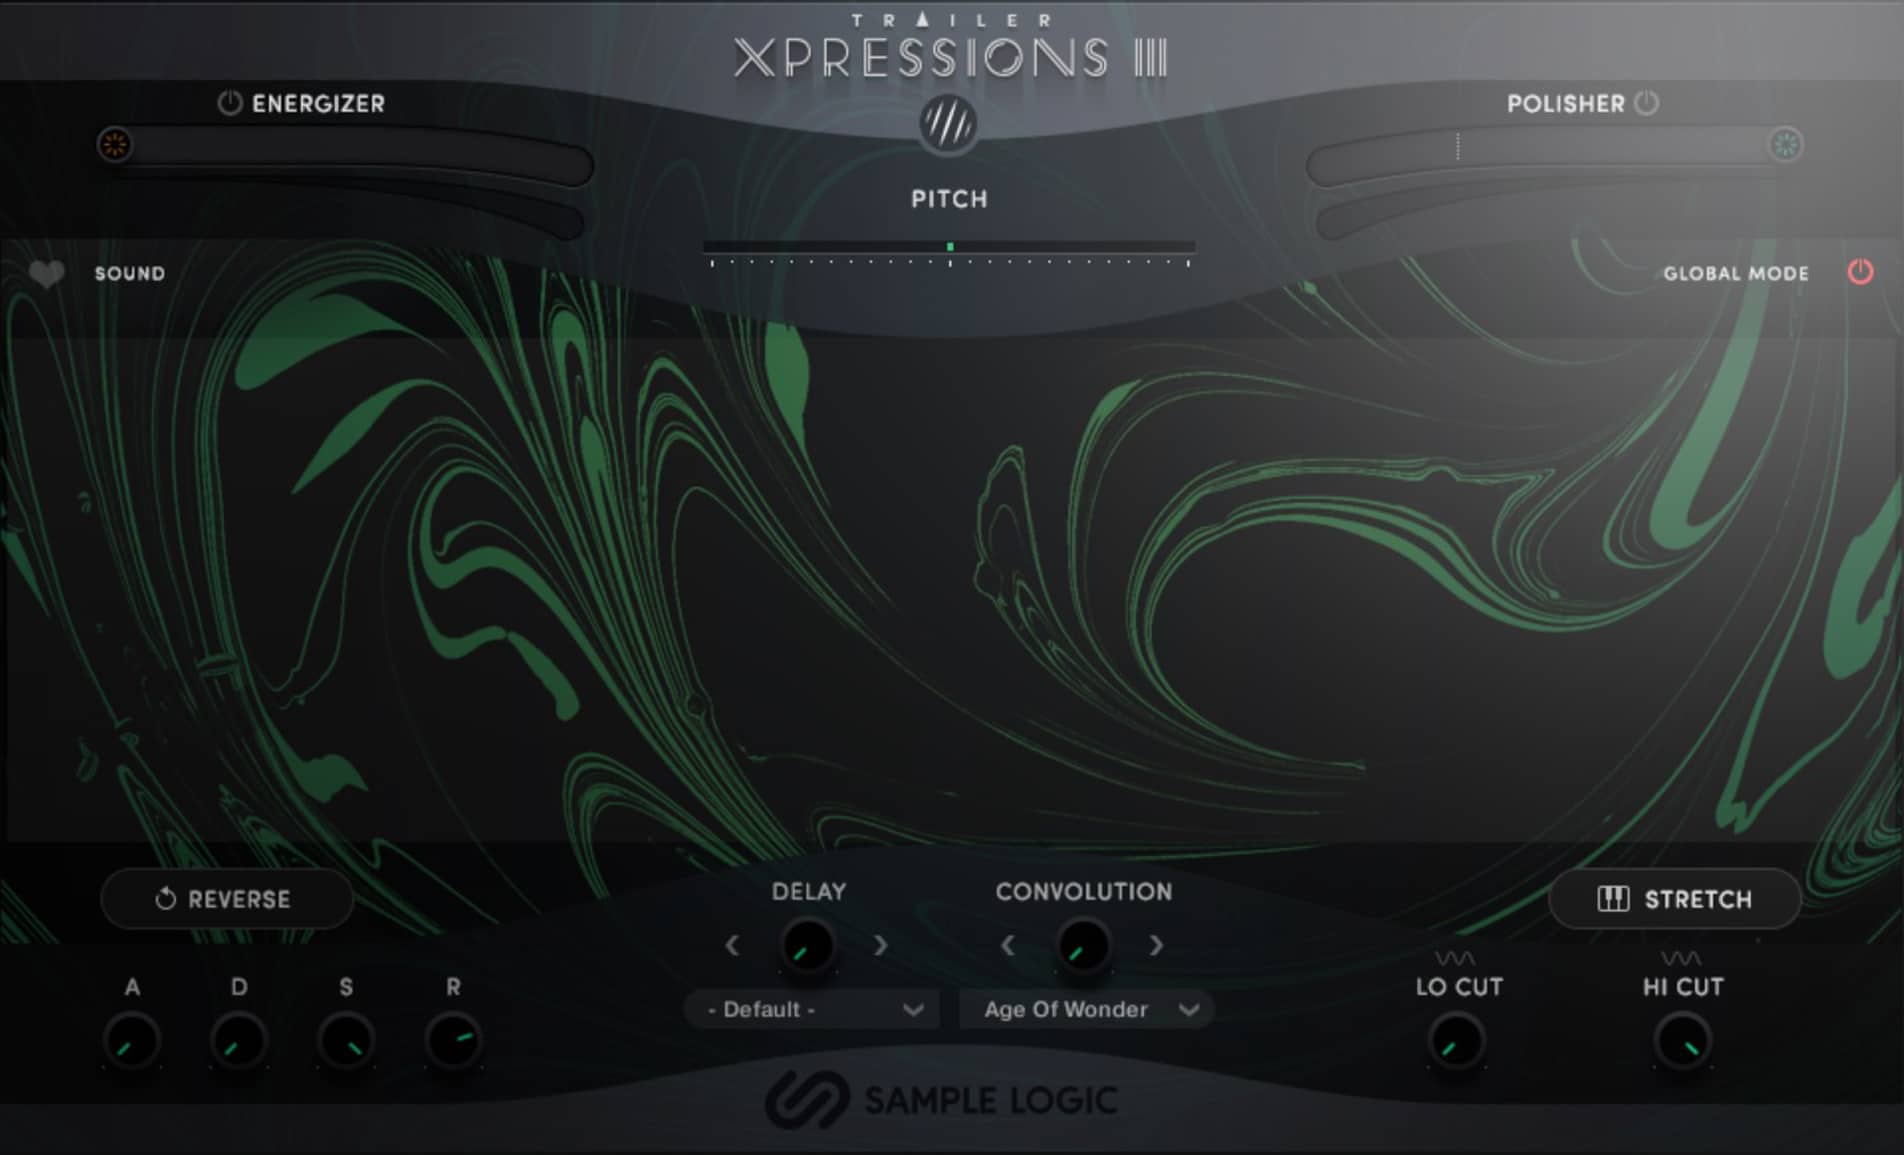 Introducing-Trailer-Xpressions-3-Cinematic-Sound-Design-Redefined